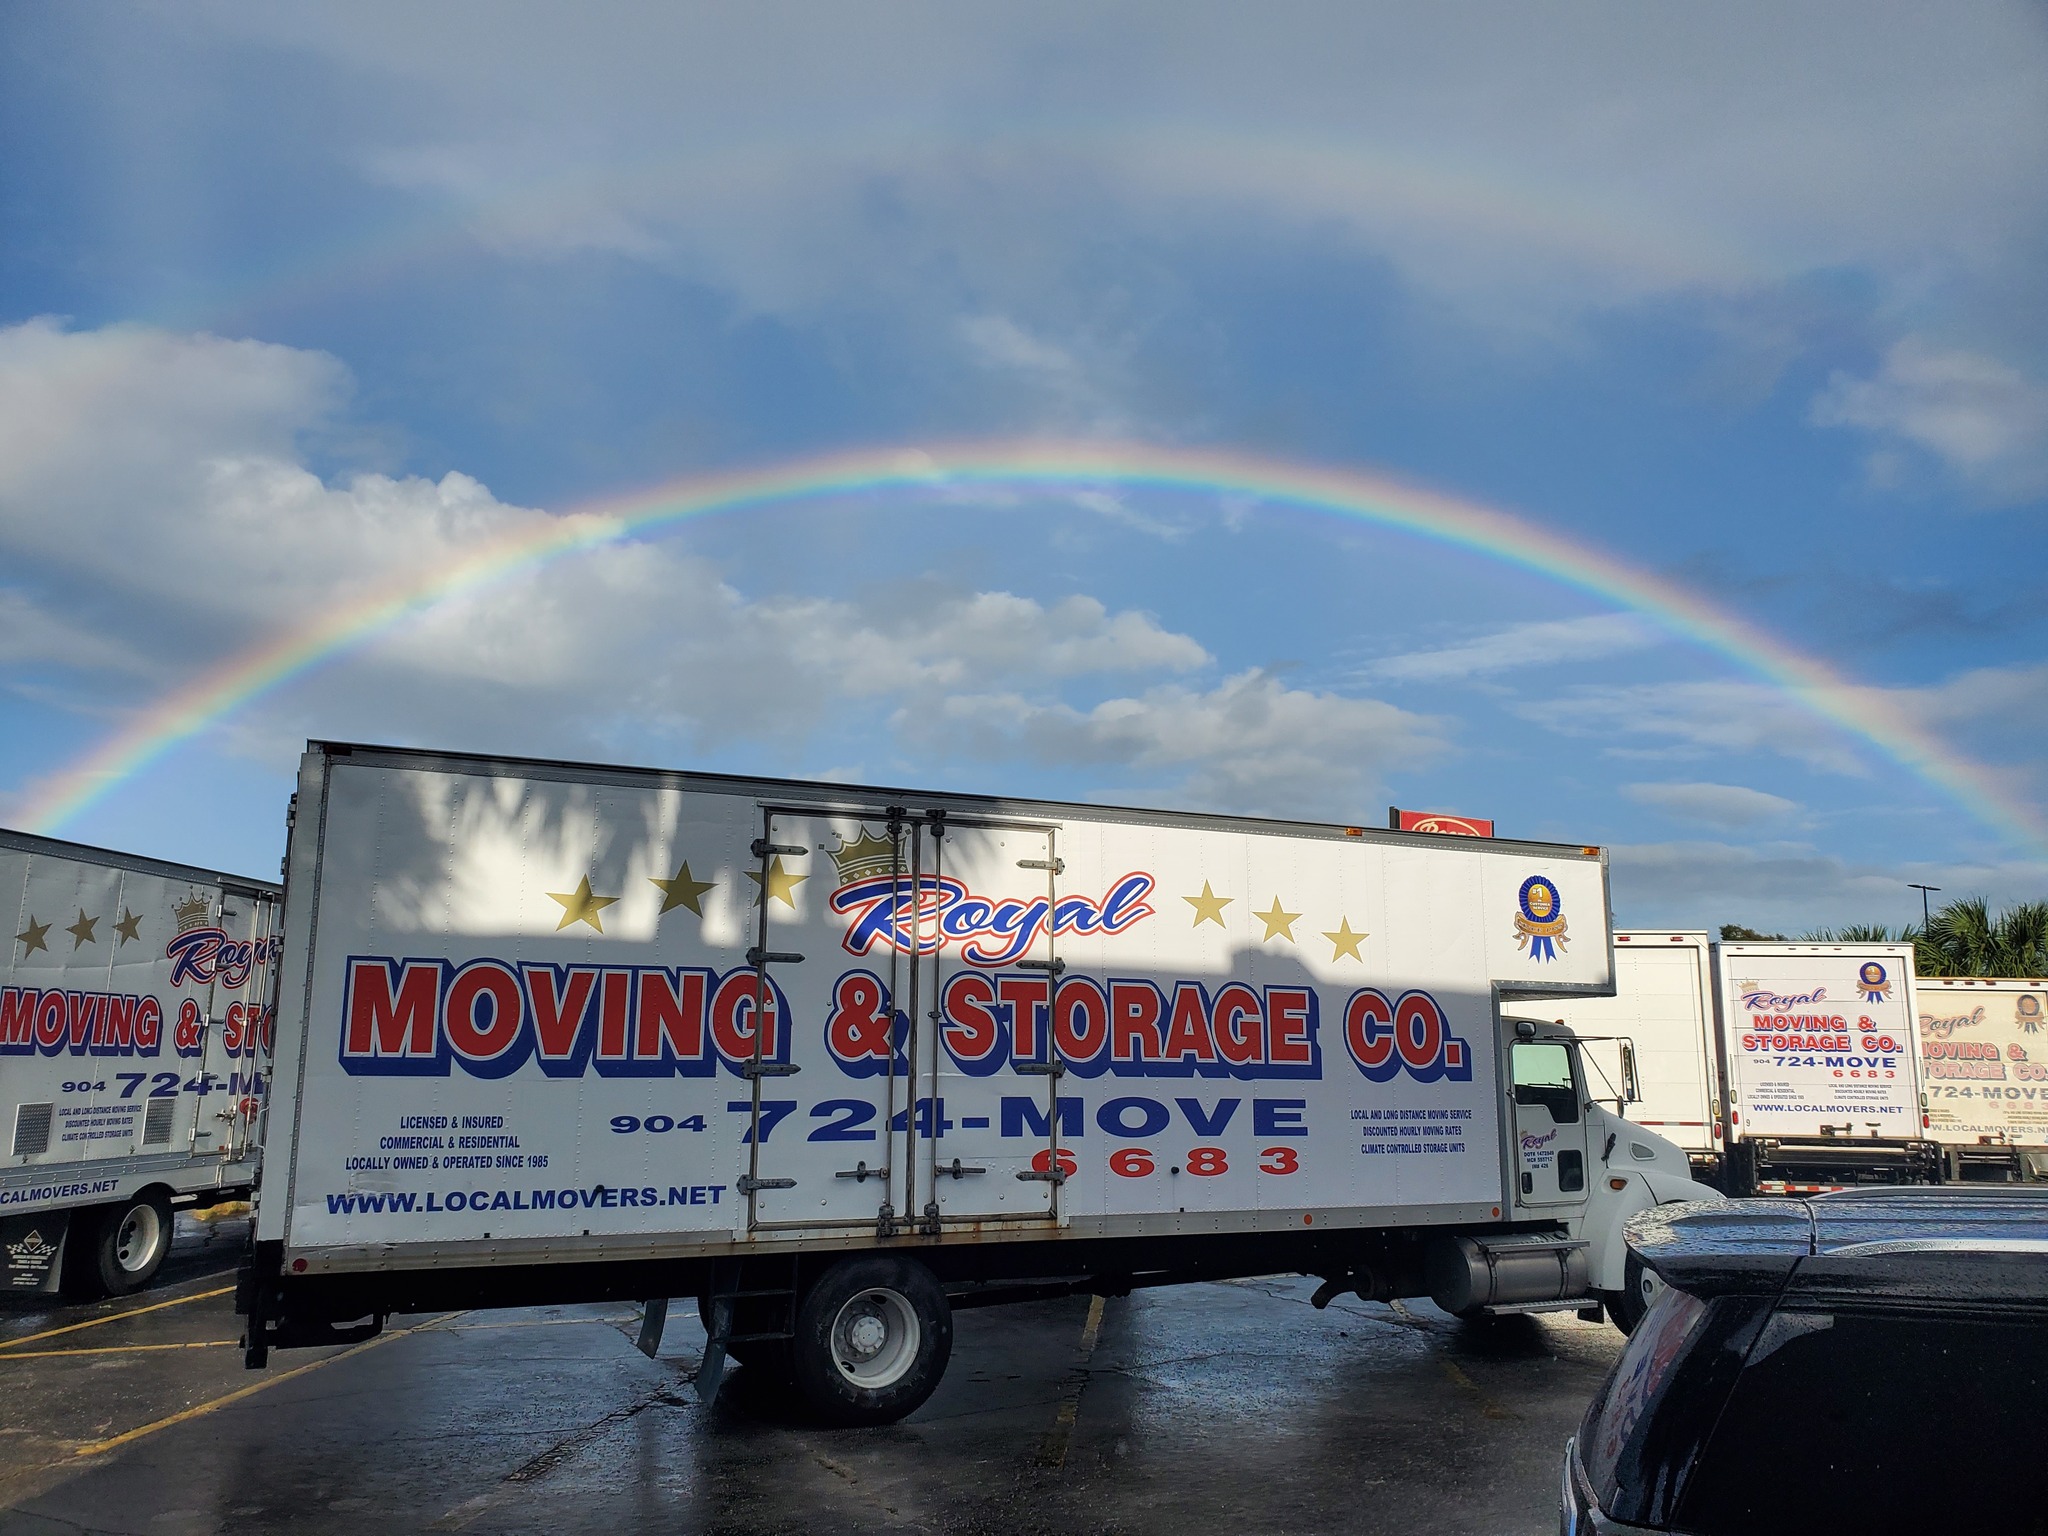 Royal Moving and Storage Local Movers in Jacksonville